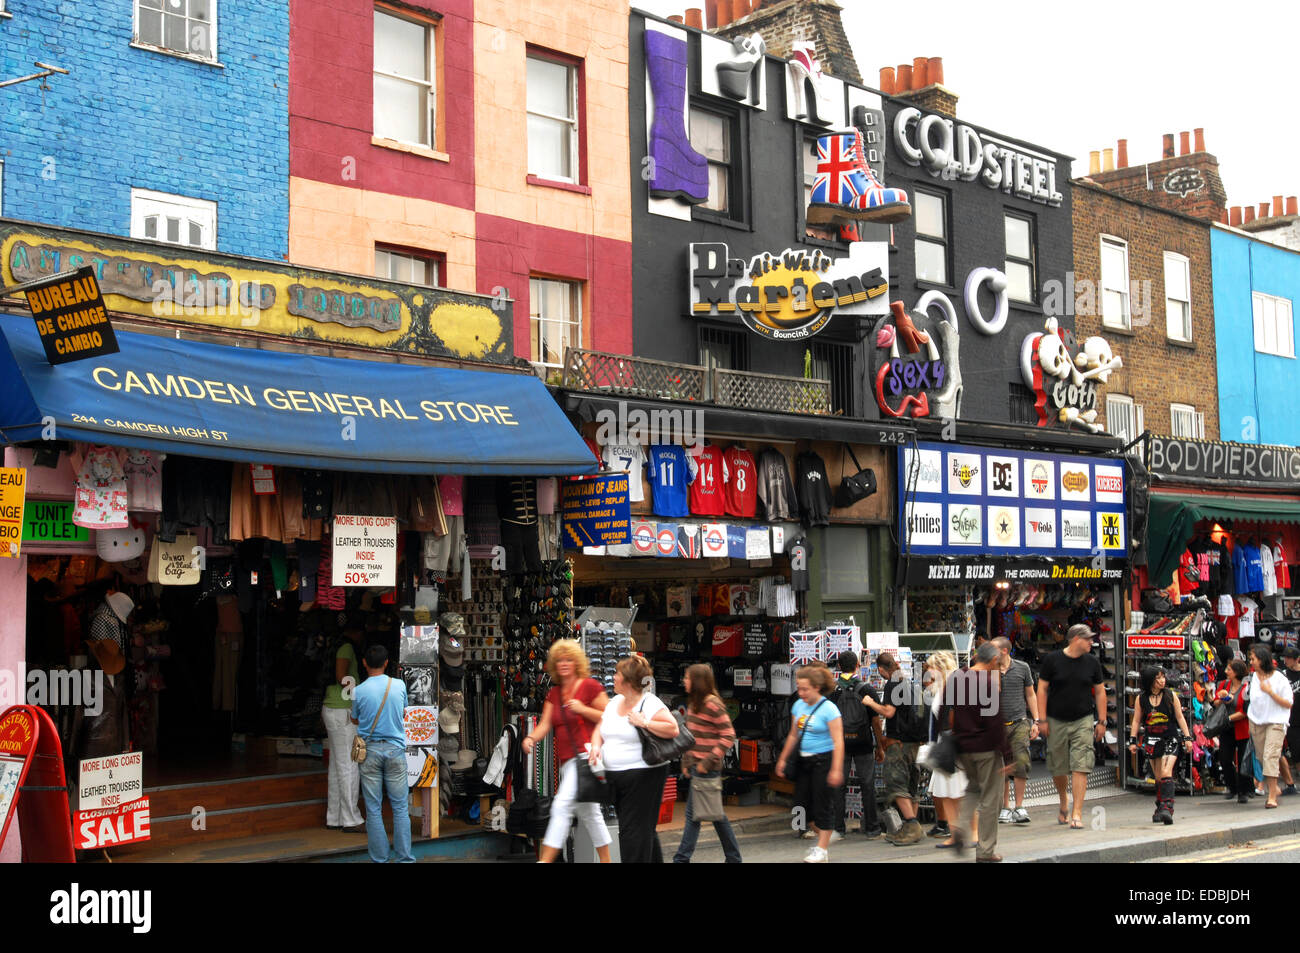 The Gothic and Alternate Clothing Shops, Camden High Street Stock Photo